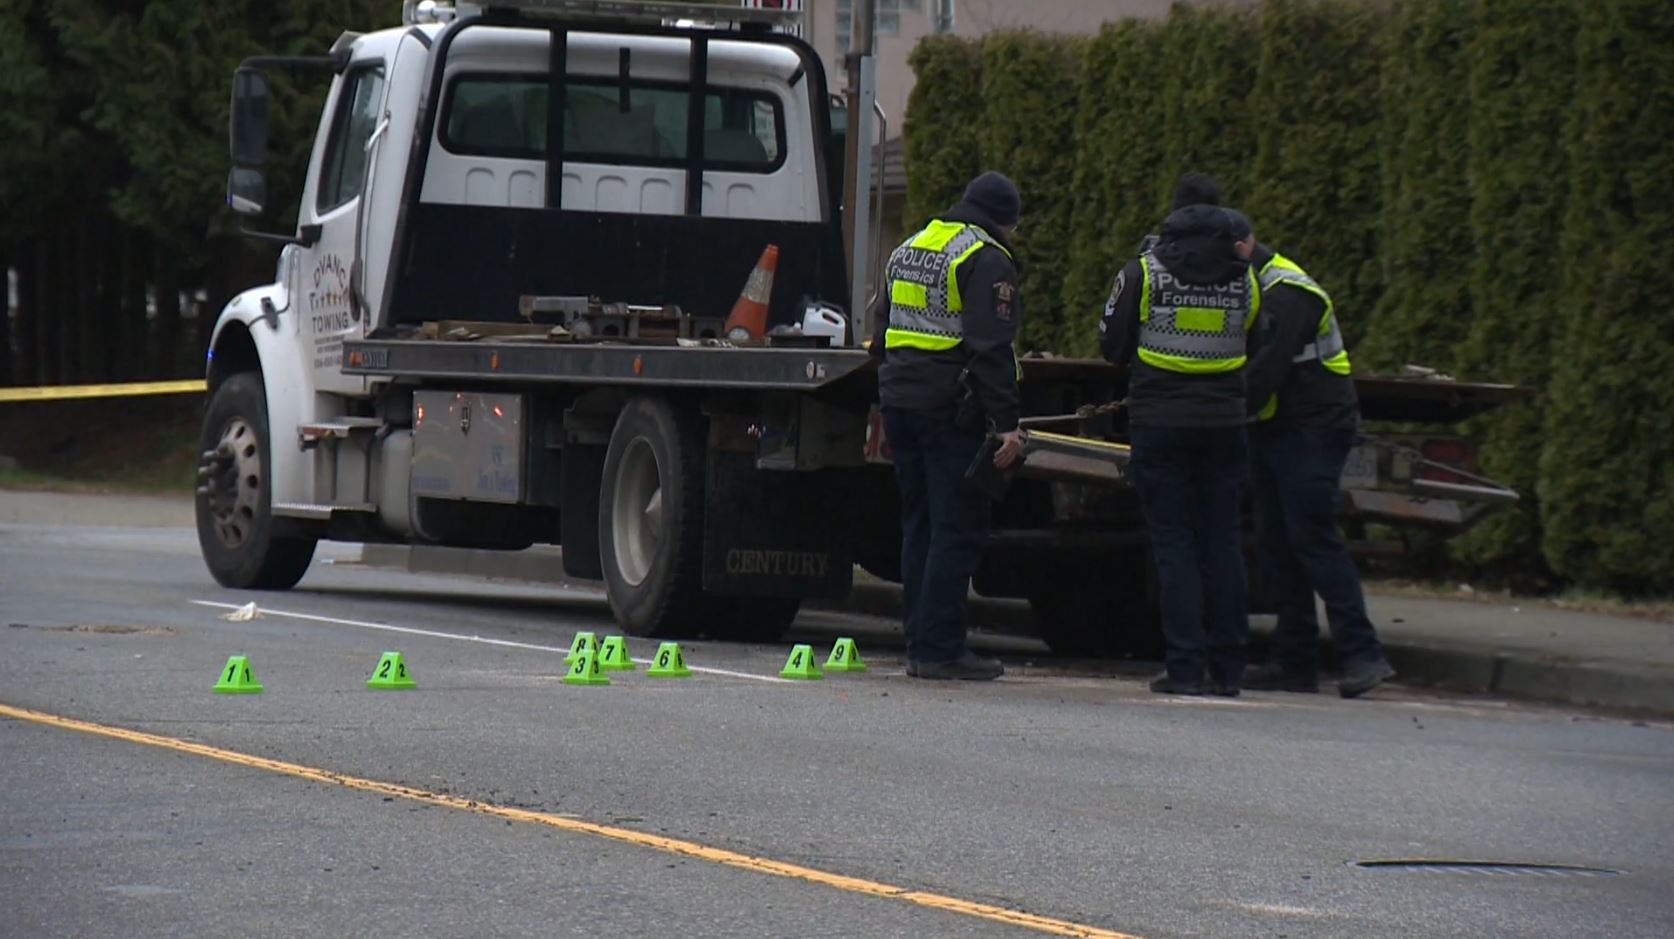 1 in critical condition after car crashes into semi-truck in Burnaby, B.C.